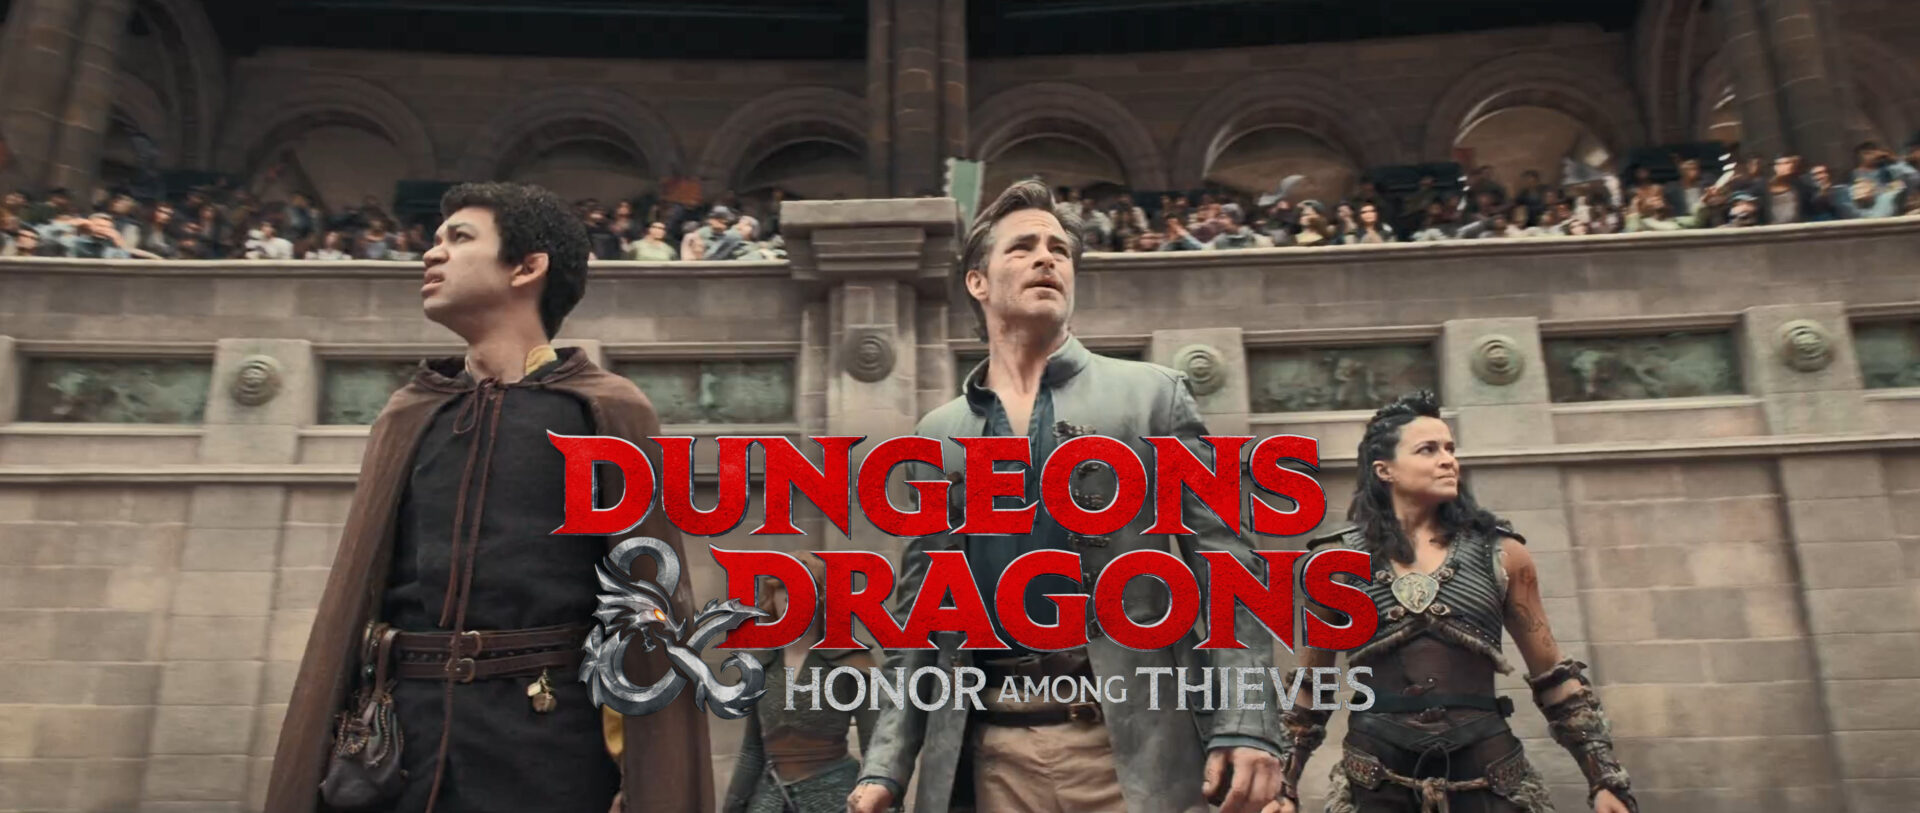 dungeons and dragons movie trailer1